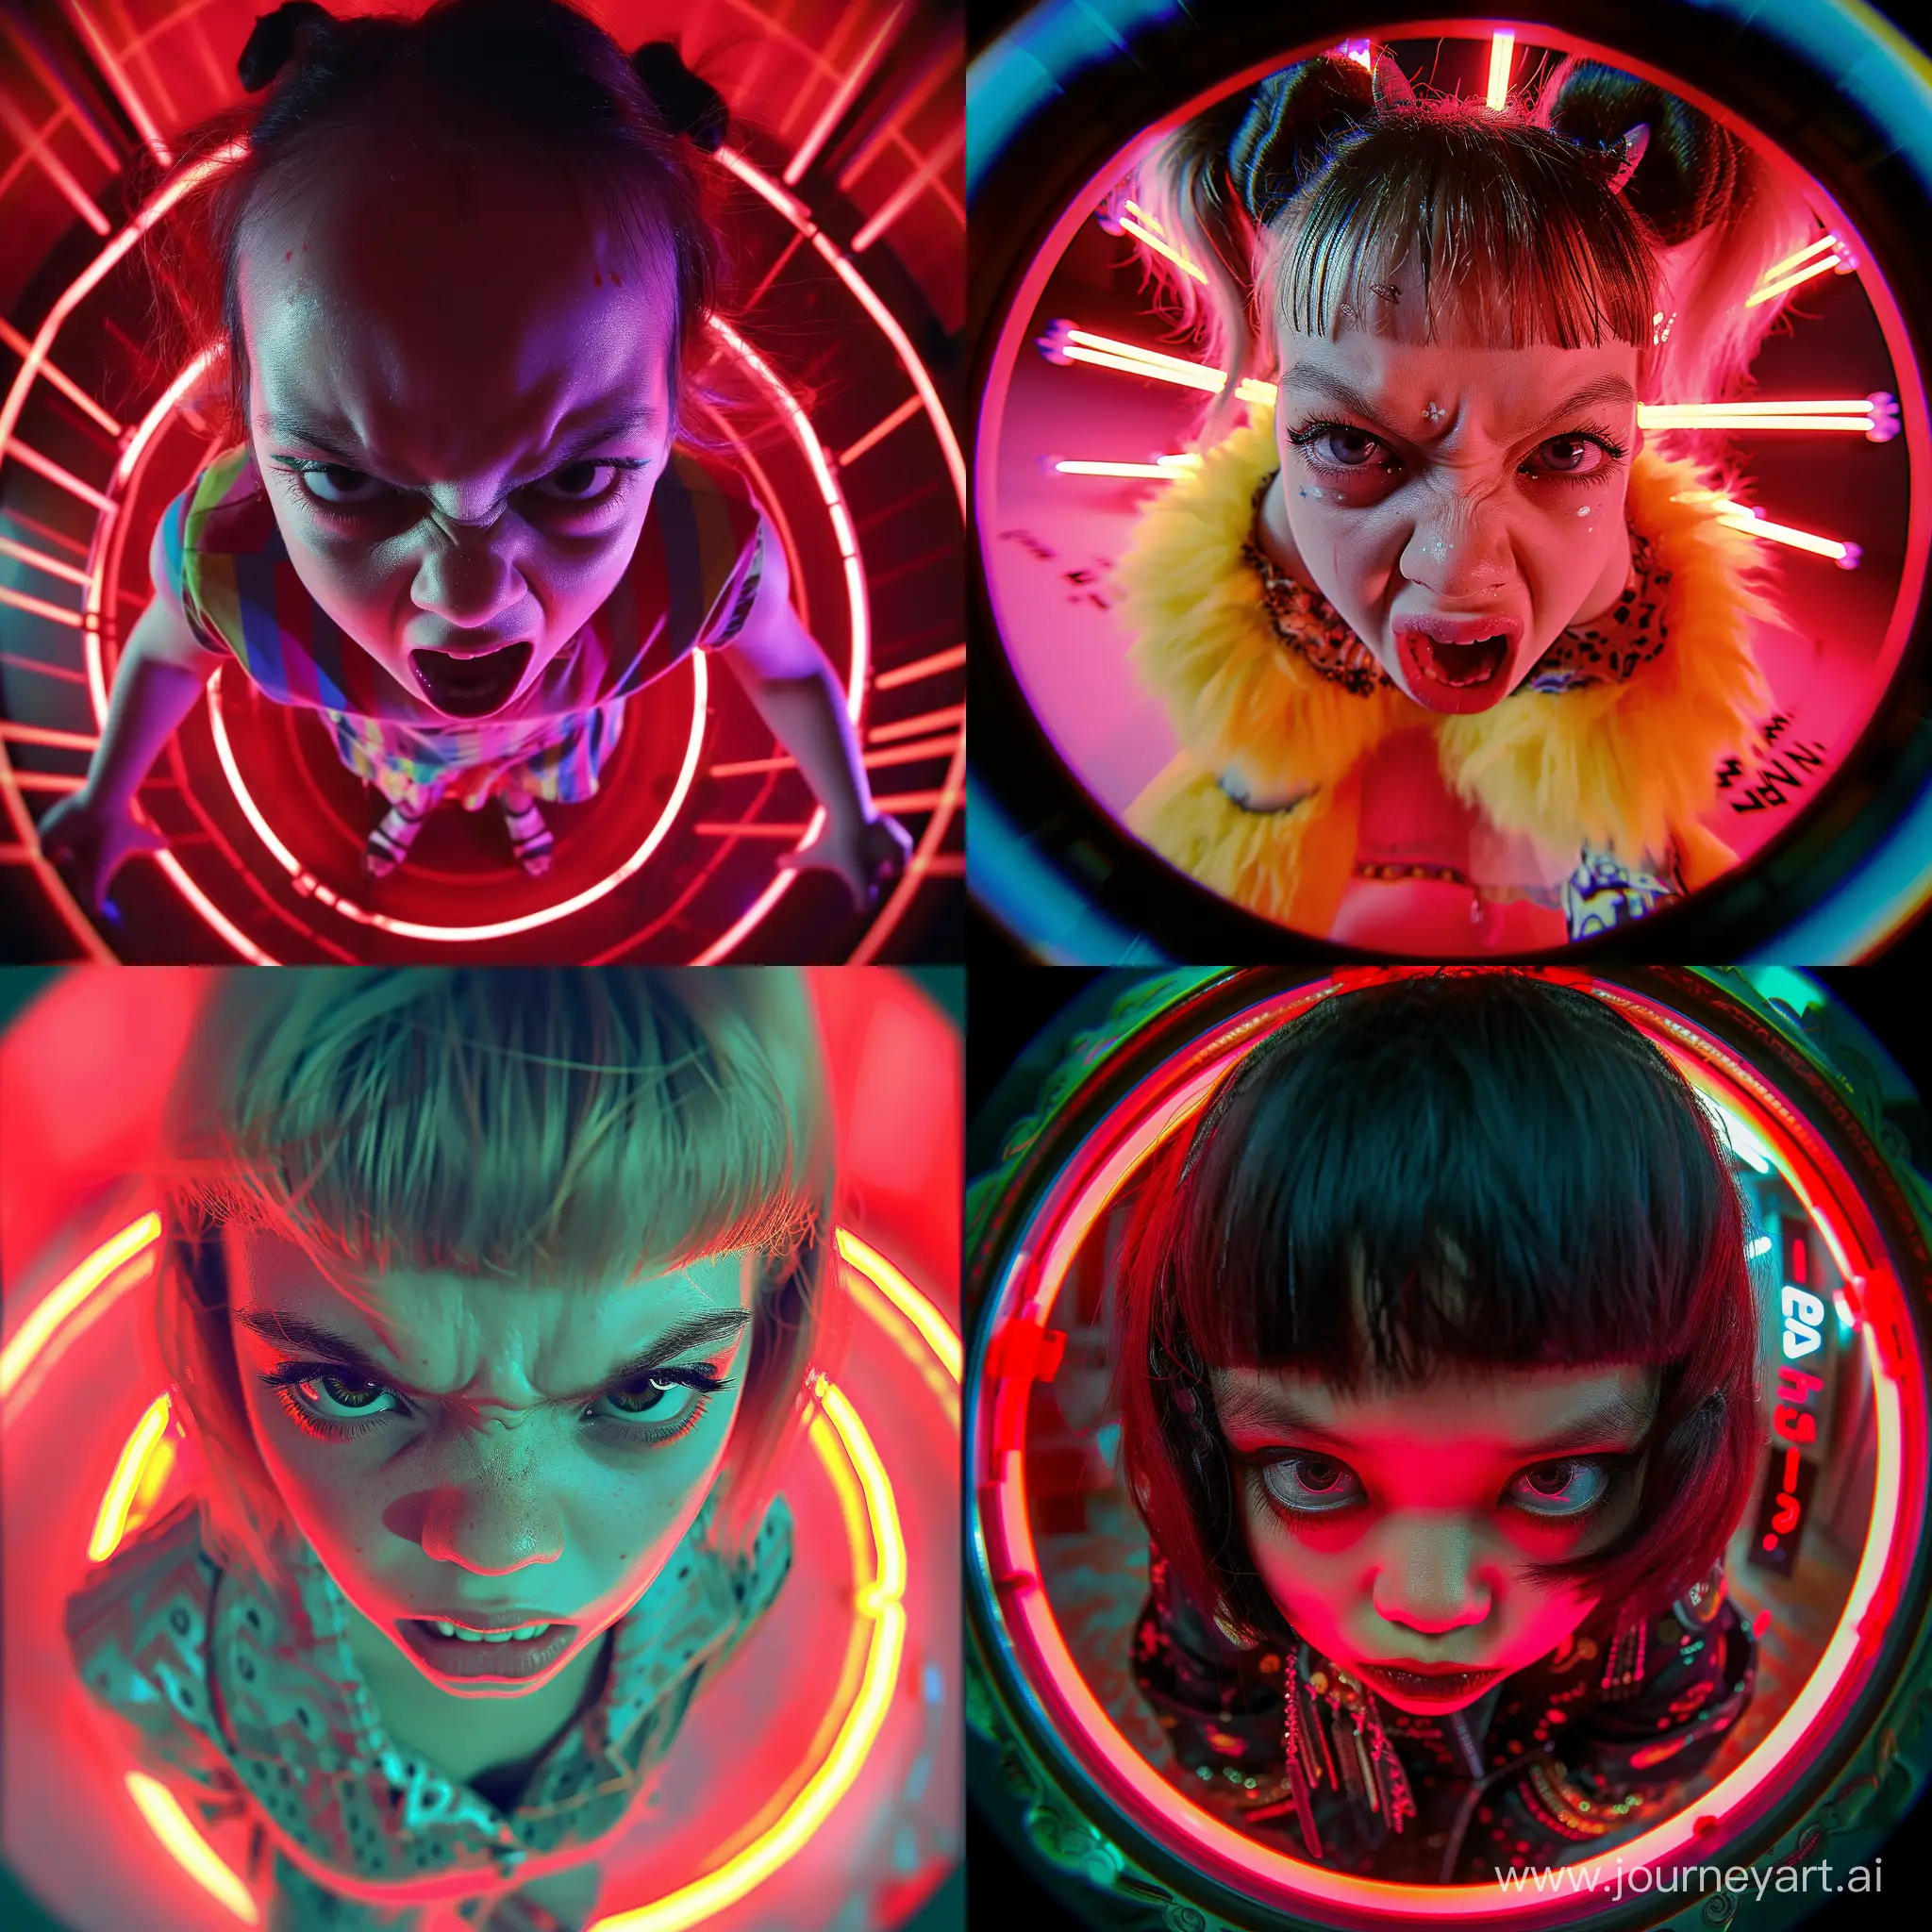 Vibrant-Fashion-Portrait-Furious-Little-Girl-in-Dramatic-Red-Neon-Lighting